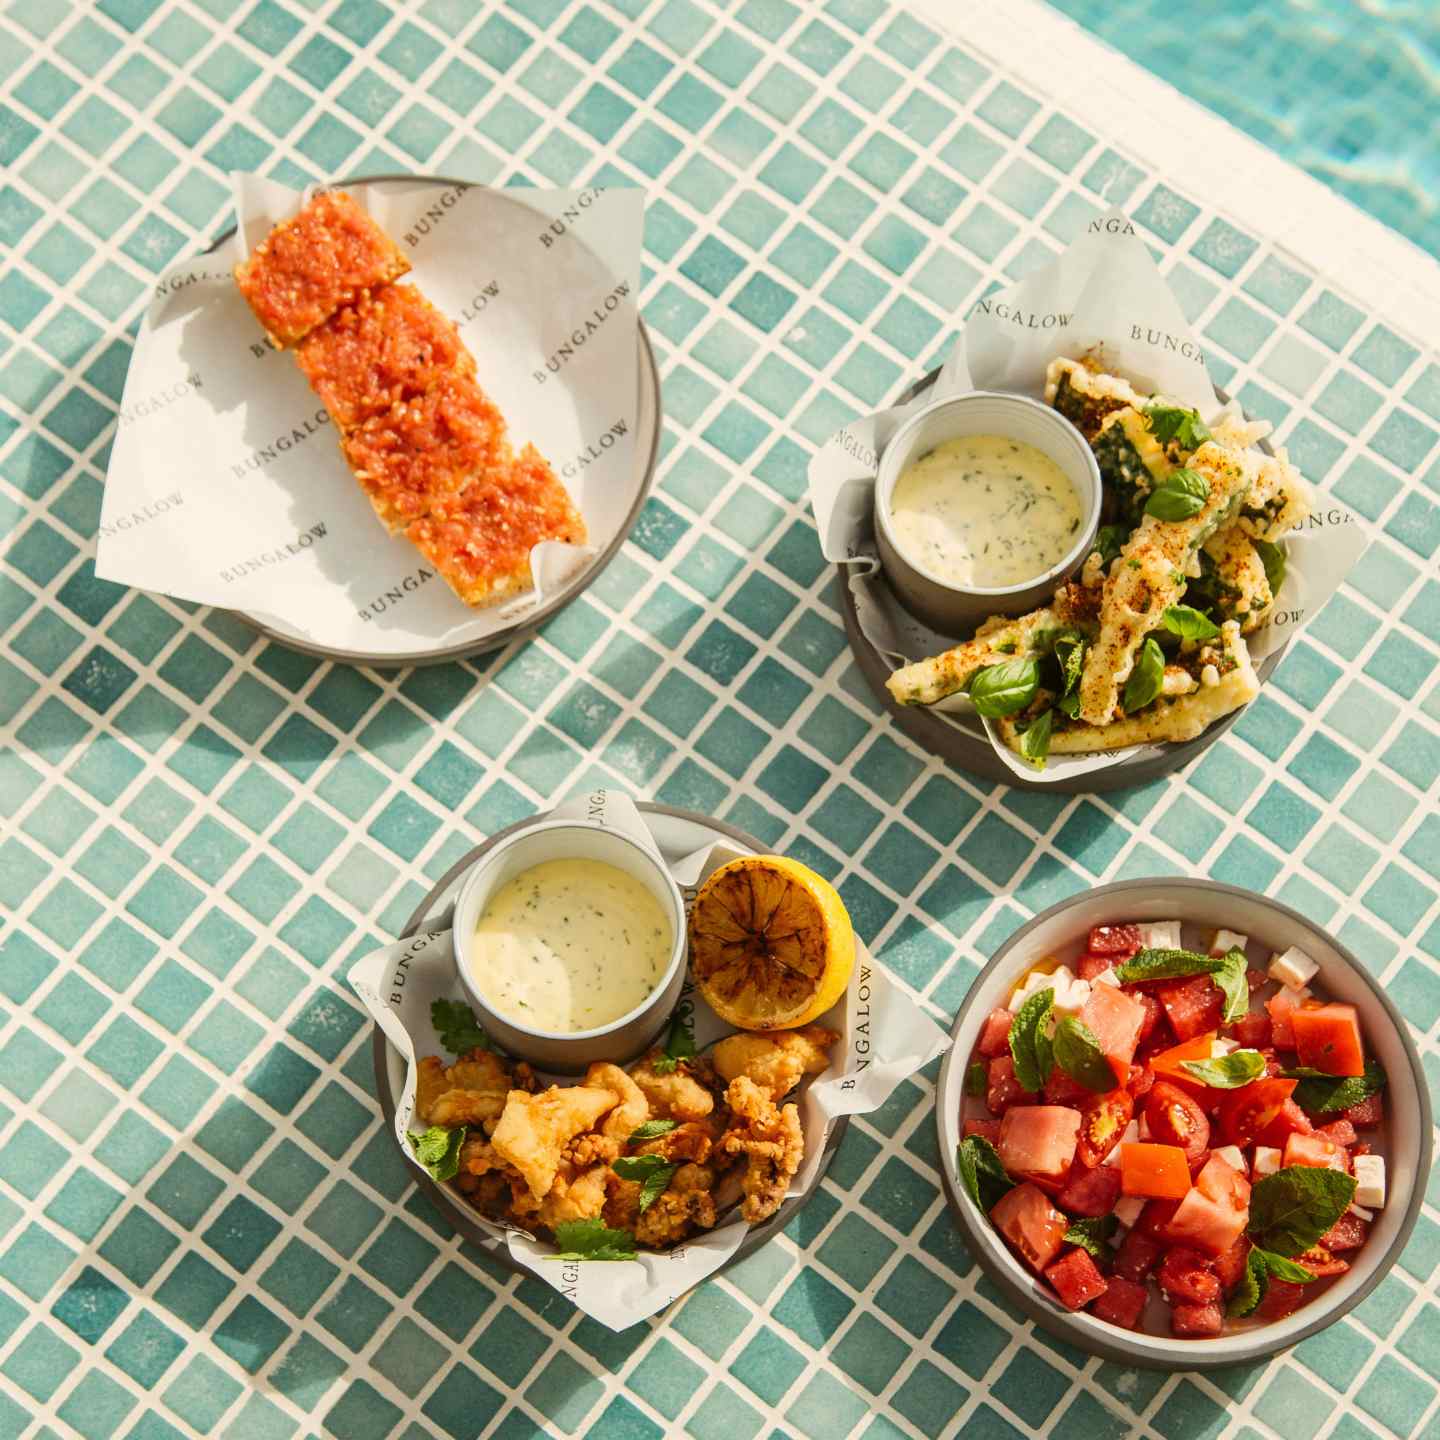 Tomato salad in a round bowl, calamari with dipping sauce and lemon wedge, pan con tomato on round plate, fried zucchini with dip all on a blue pool tile